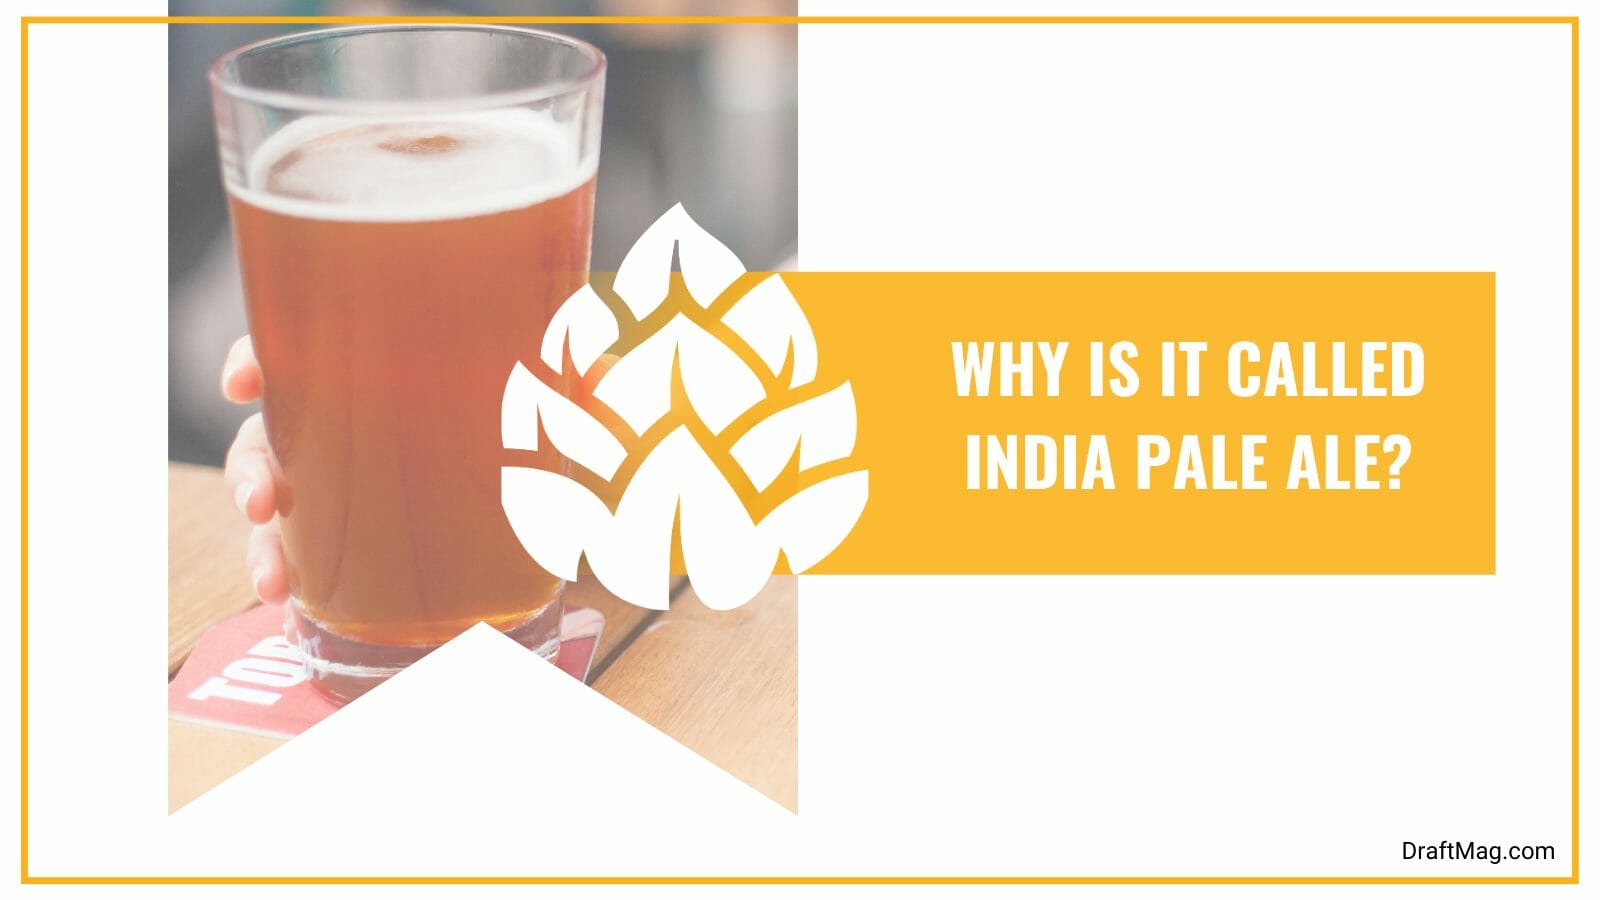 Why india pale ale